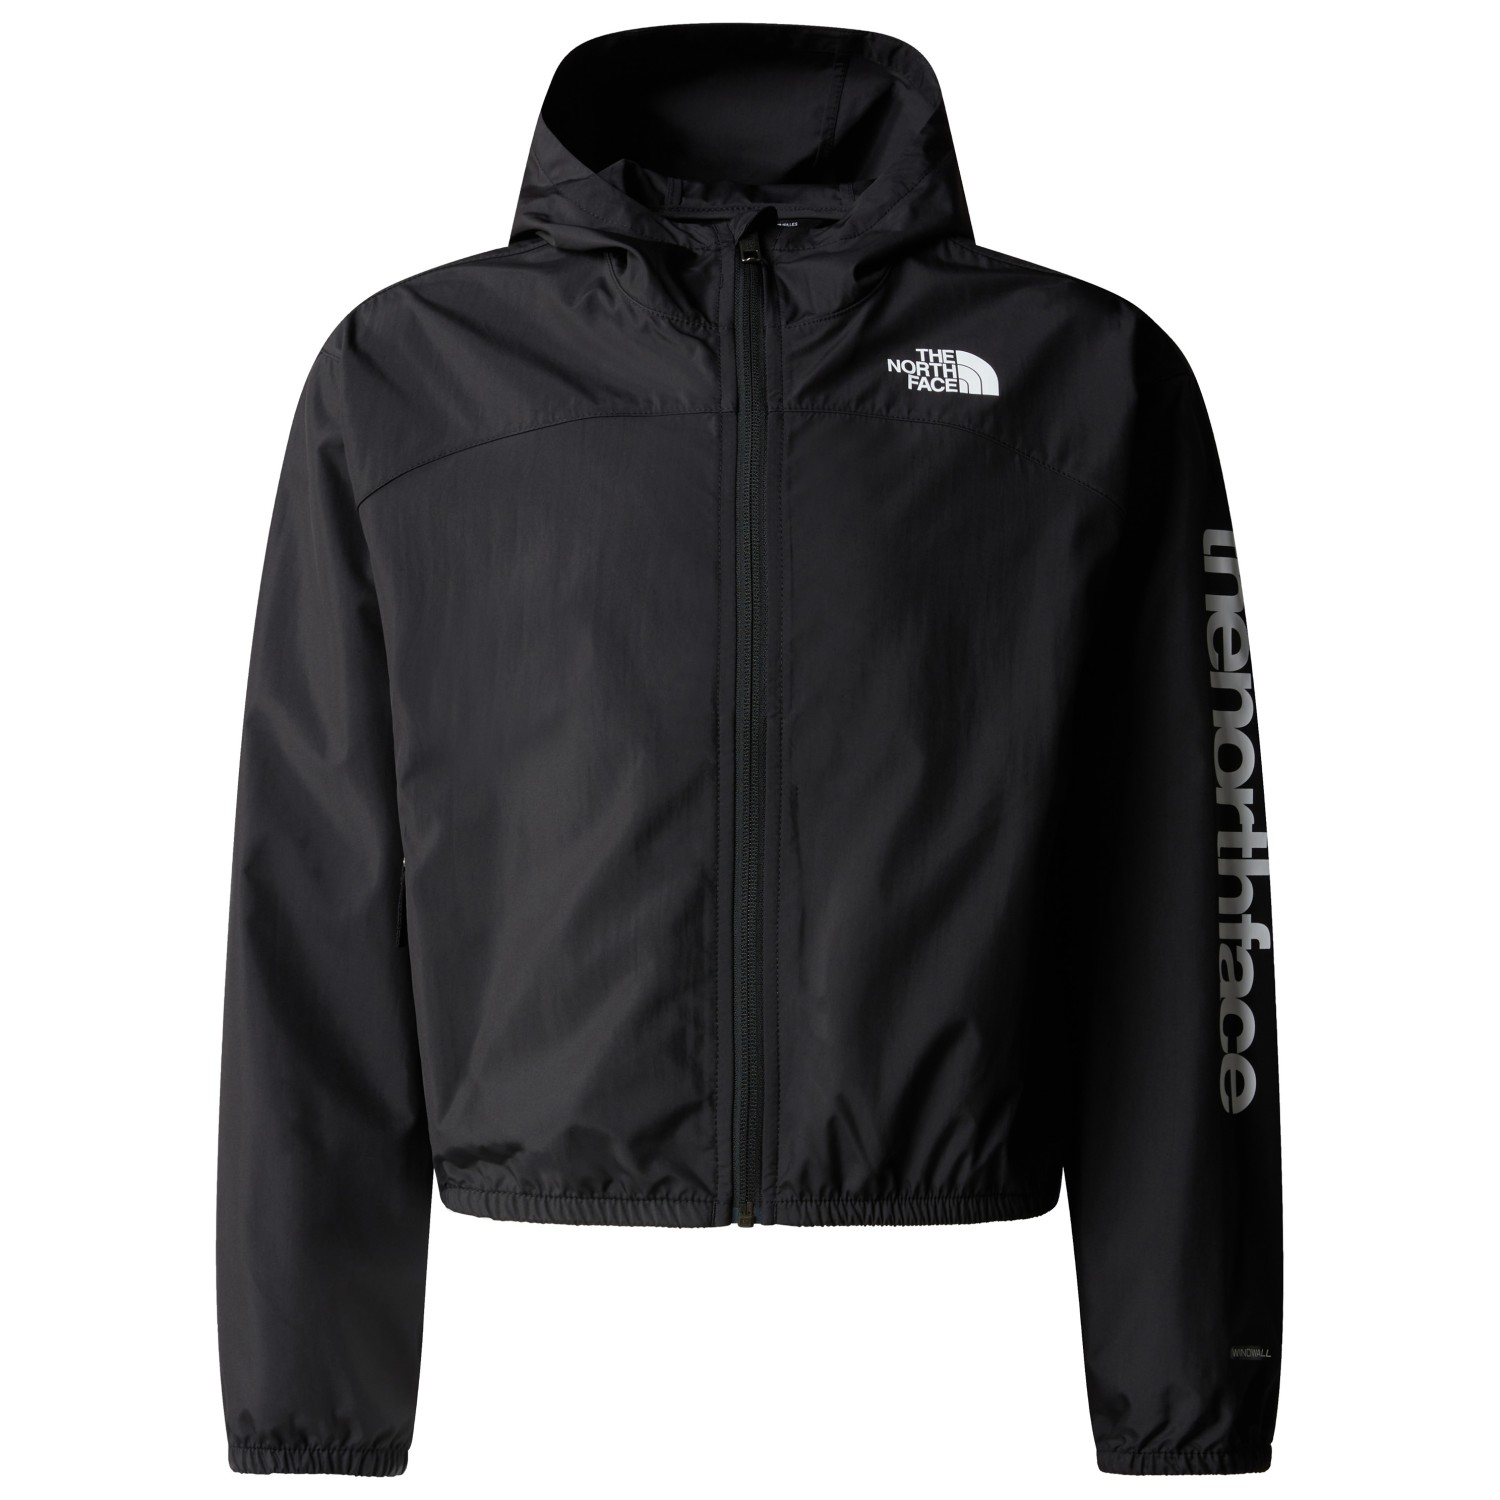 Ветровка The North Face Girl's Never Stop Hooded Windwall, цвет TNF Black ветровка the north face kid s never stop hooded windwall цвет geyser aqua